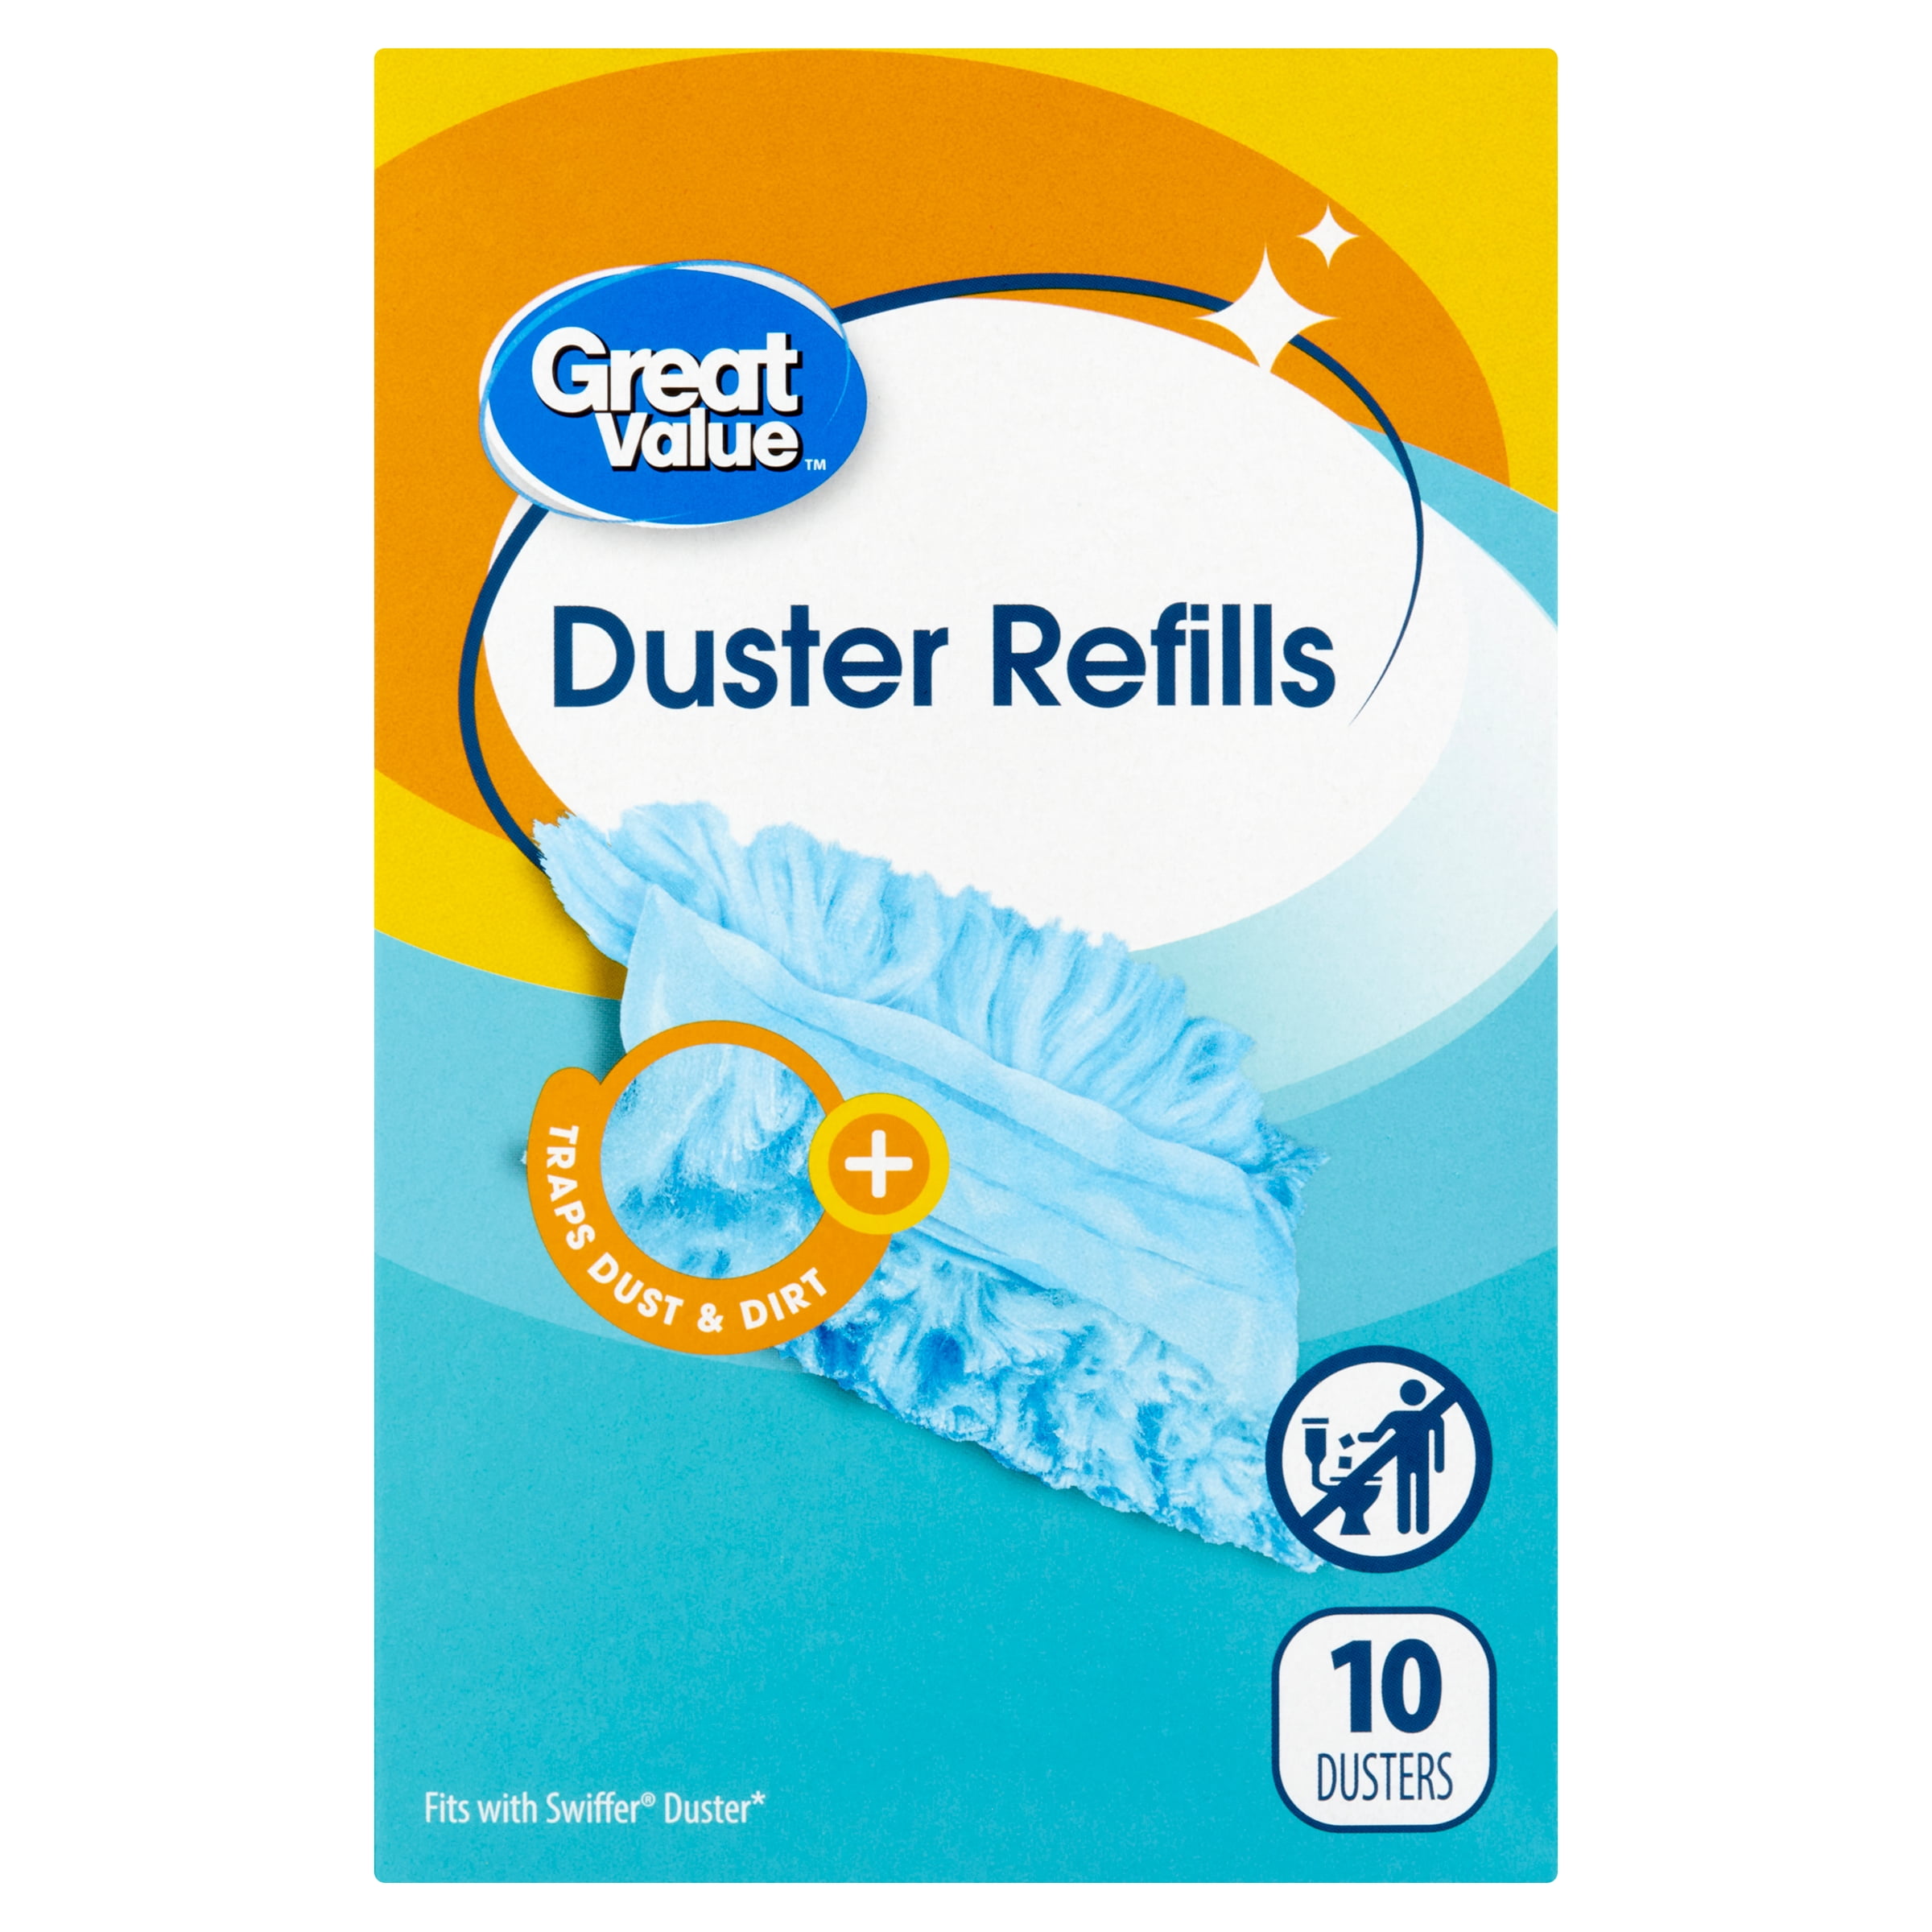 Set of 2 Washable and Reusable Duster Refills 